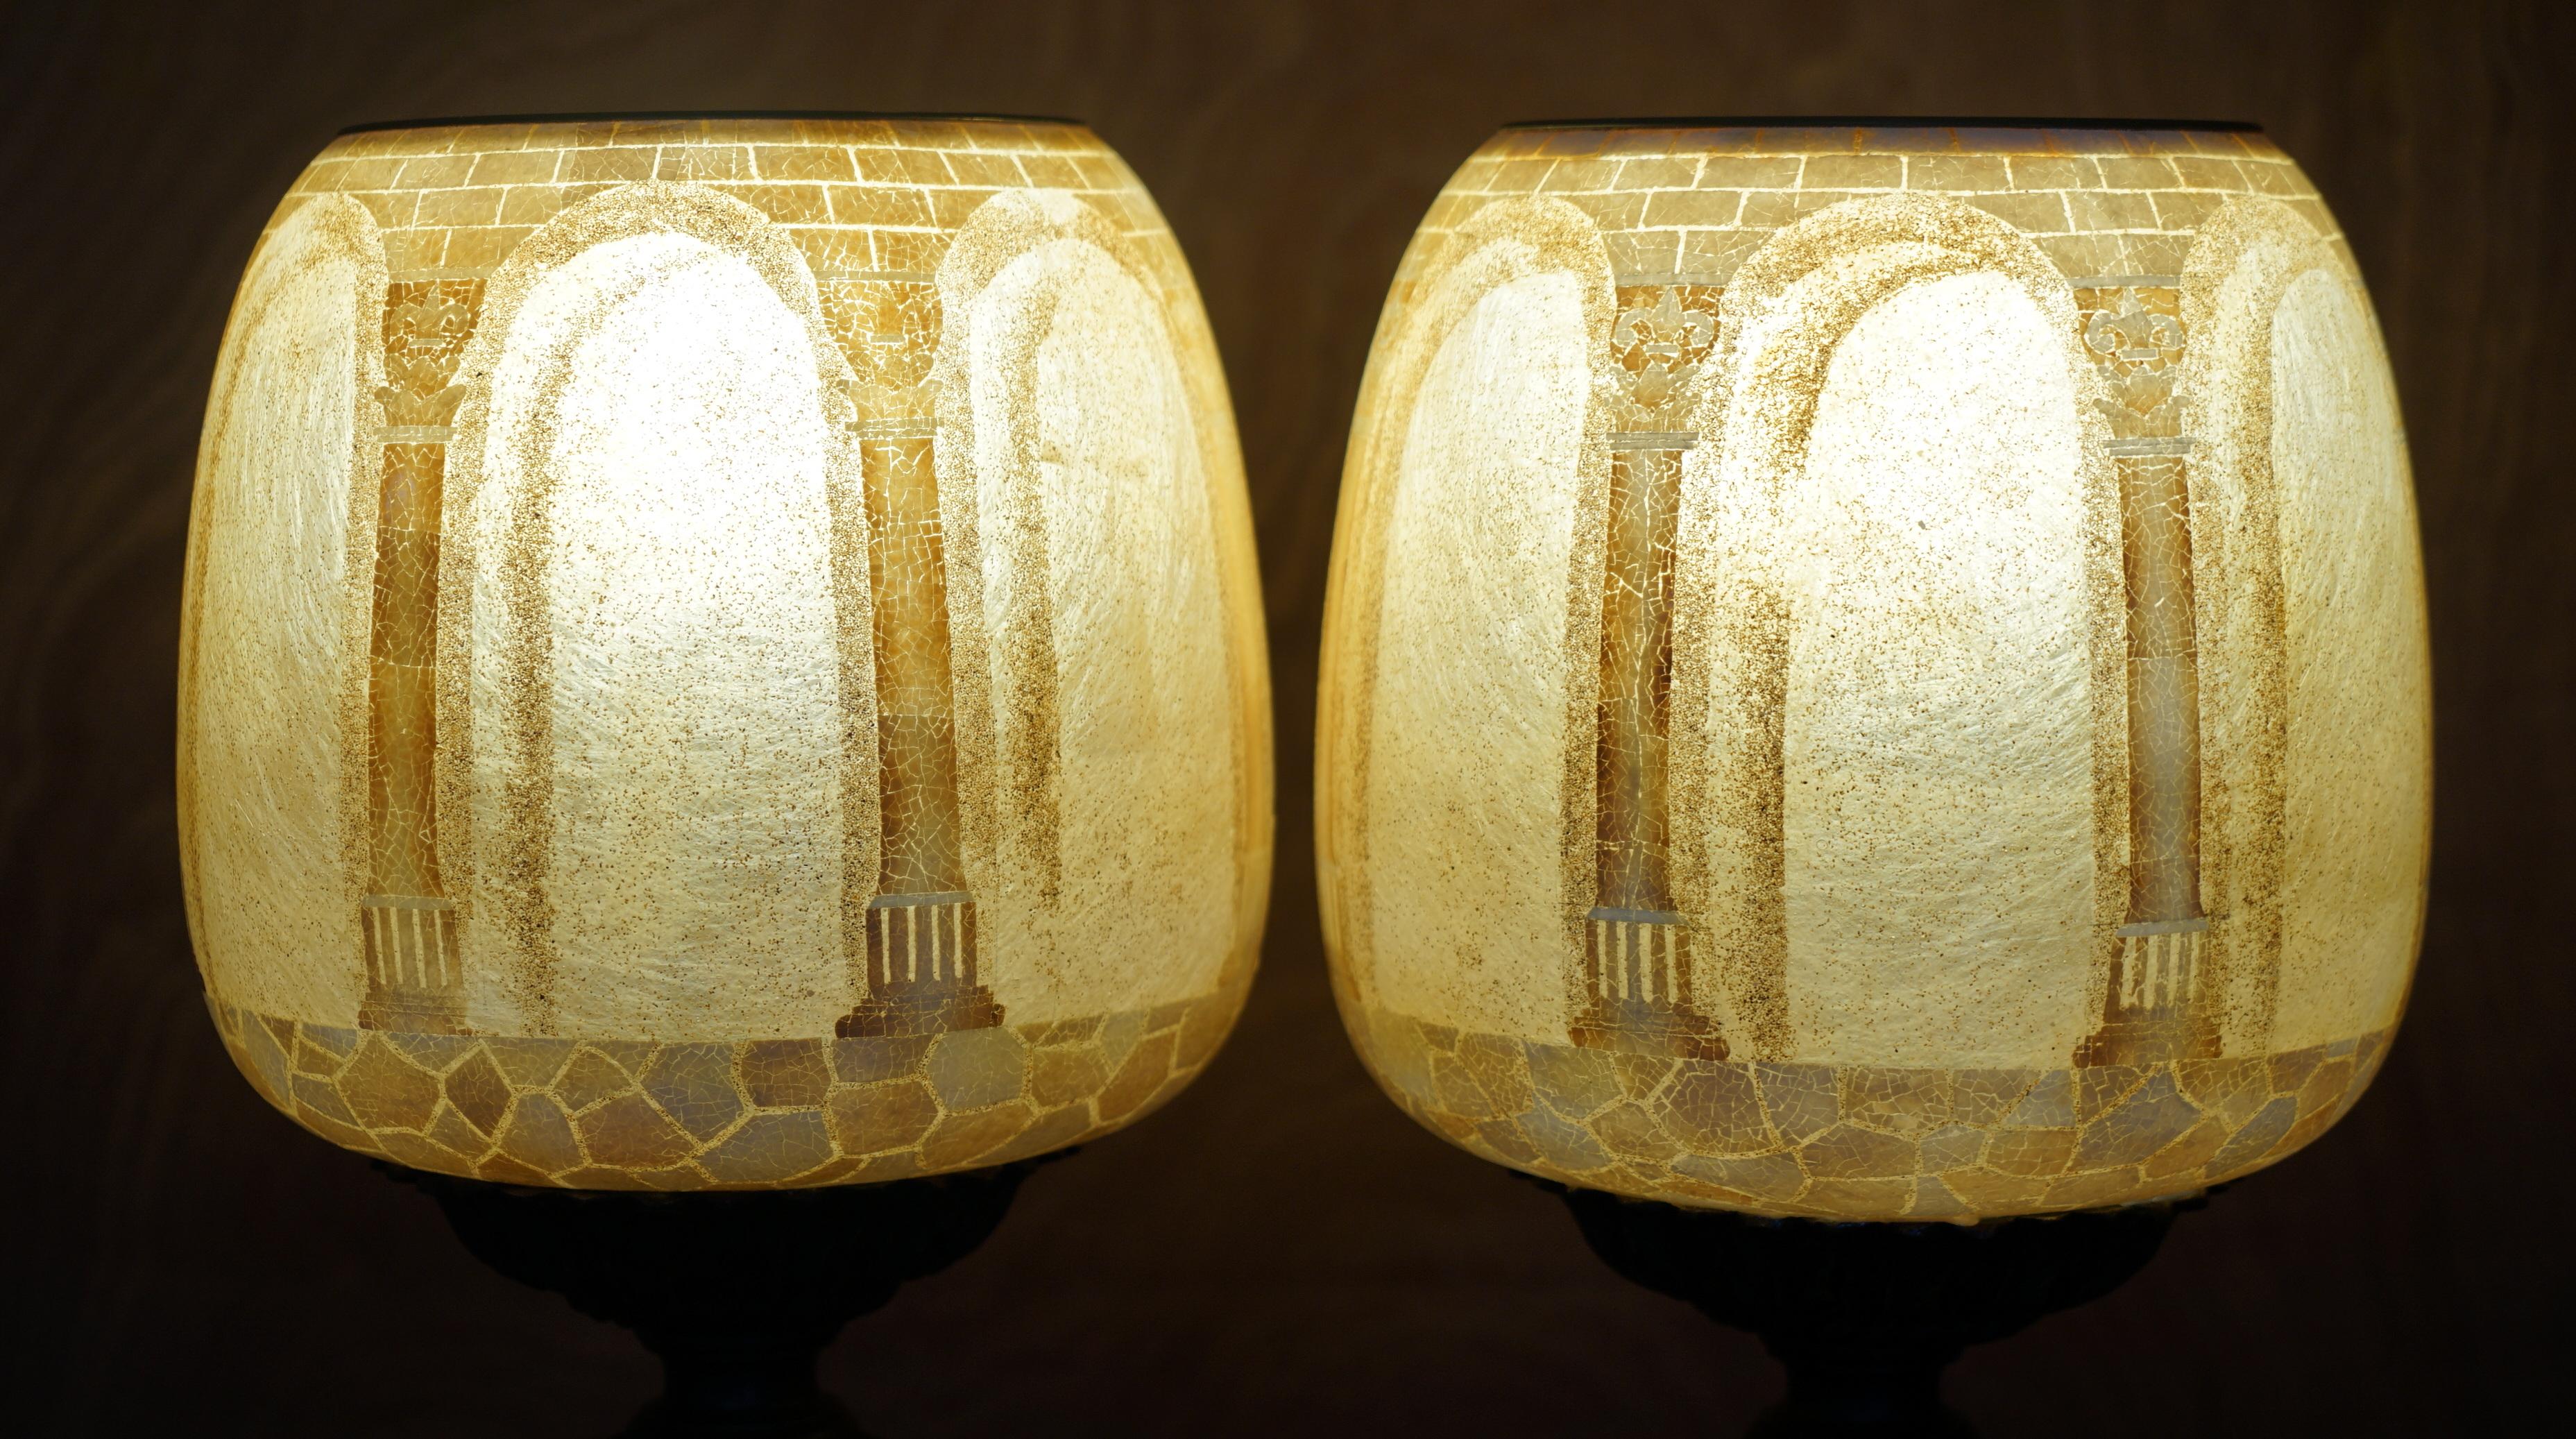 Exquisite Pair of Large Vintage Table Lamps with Corinthian Roman Pillar Shades For Sale 4